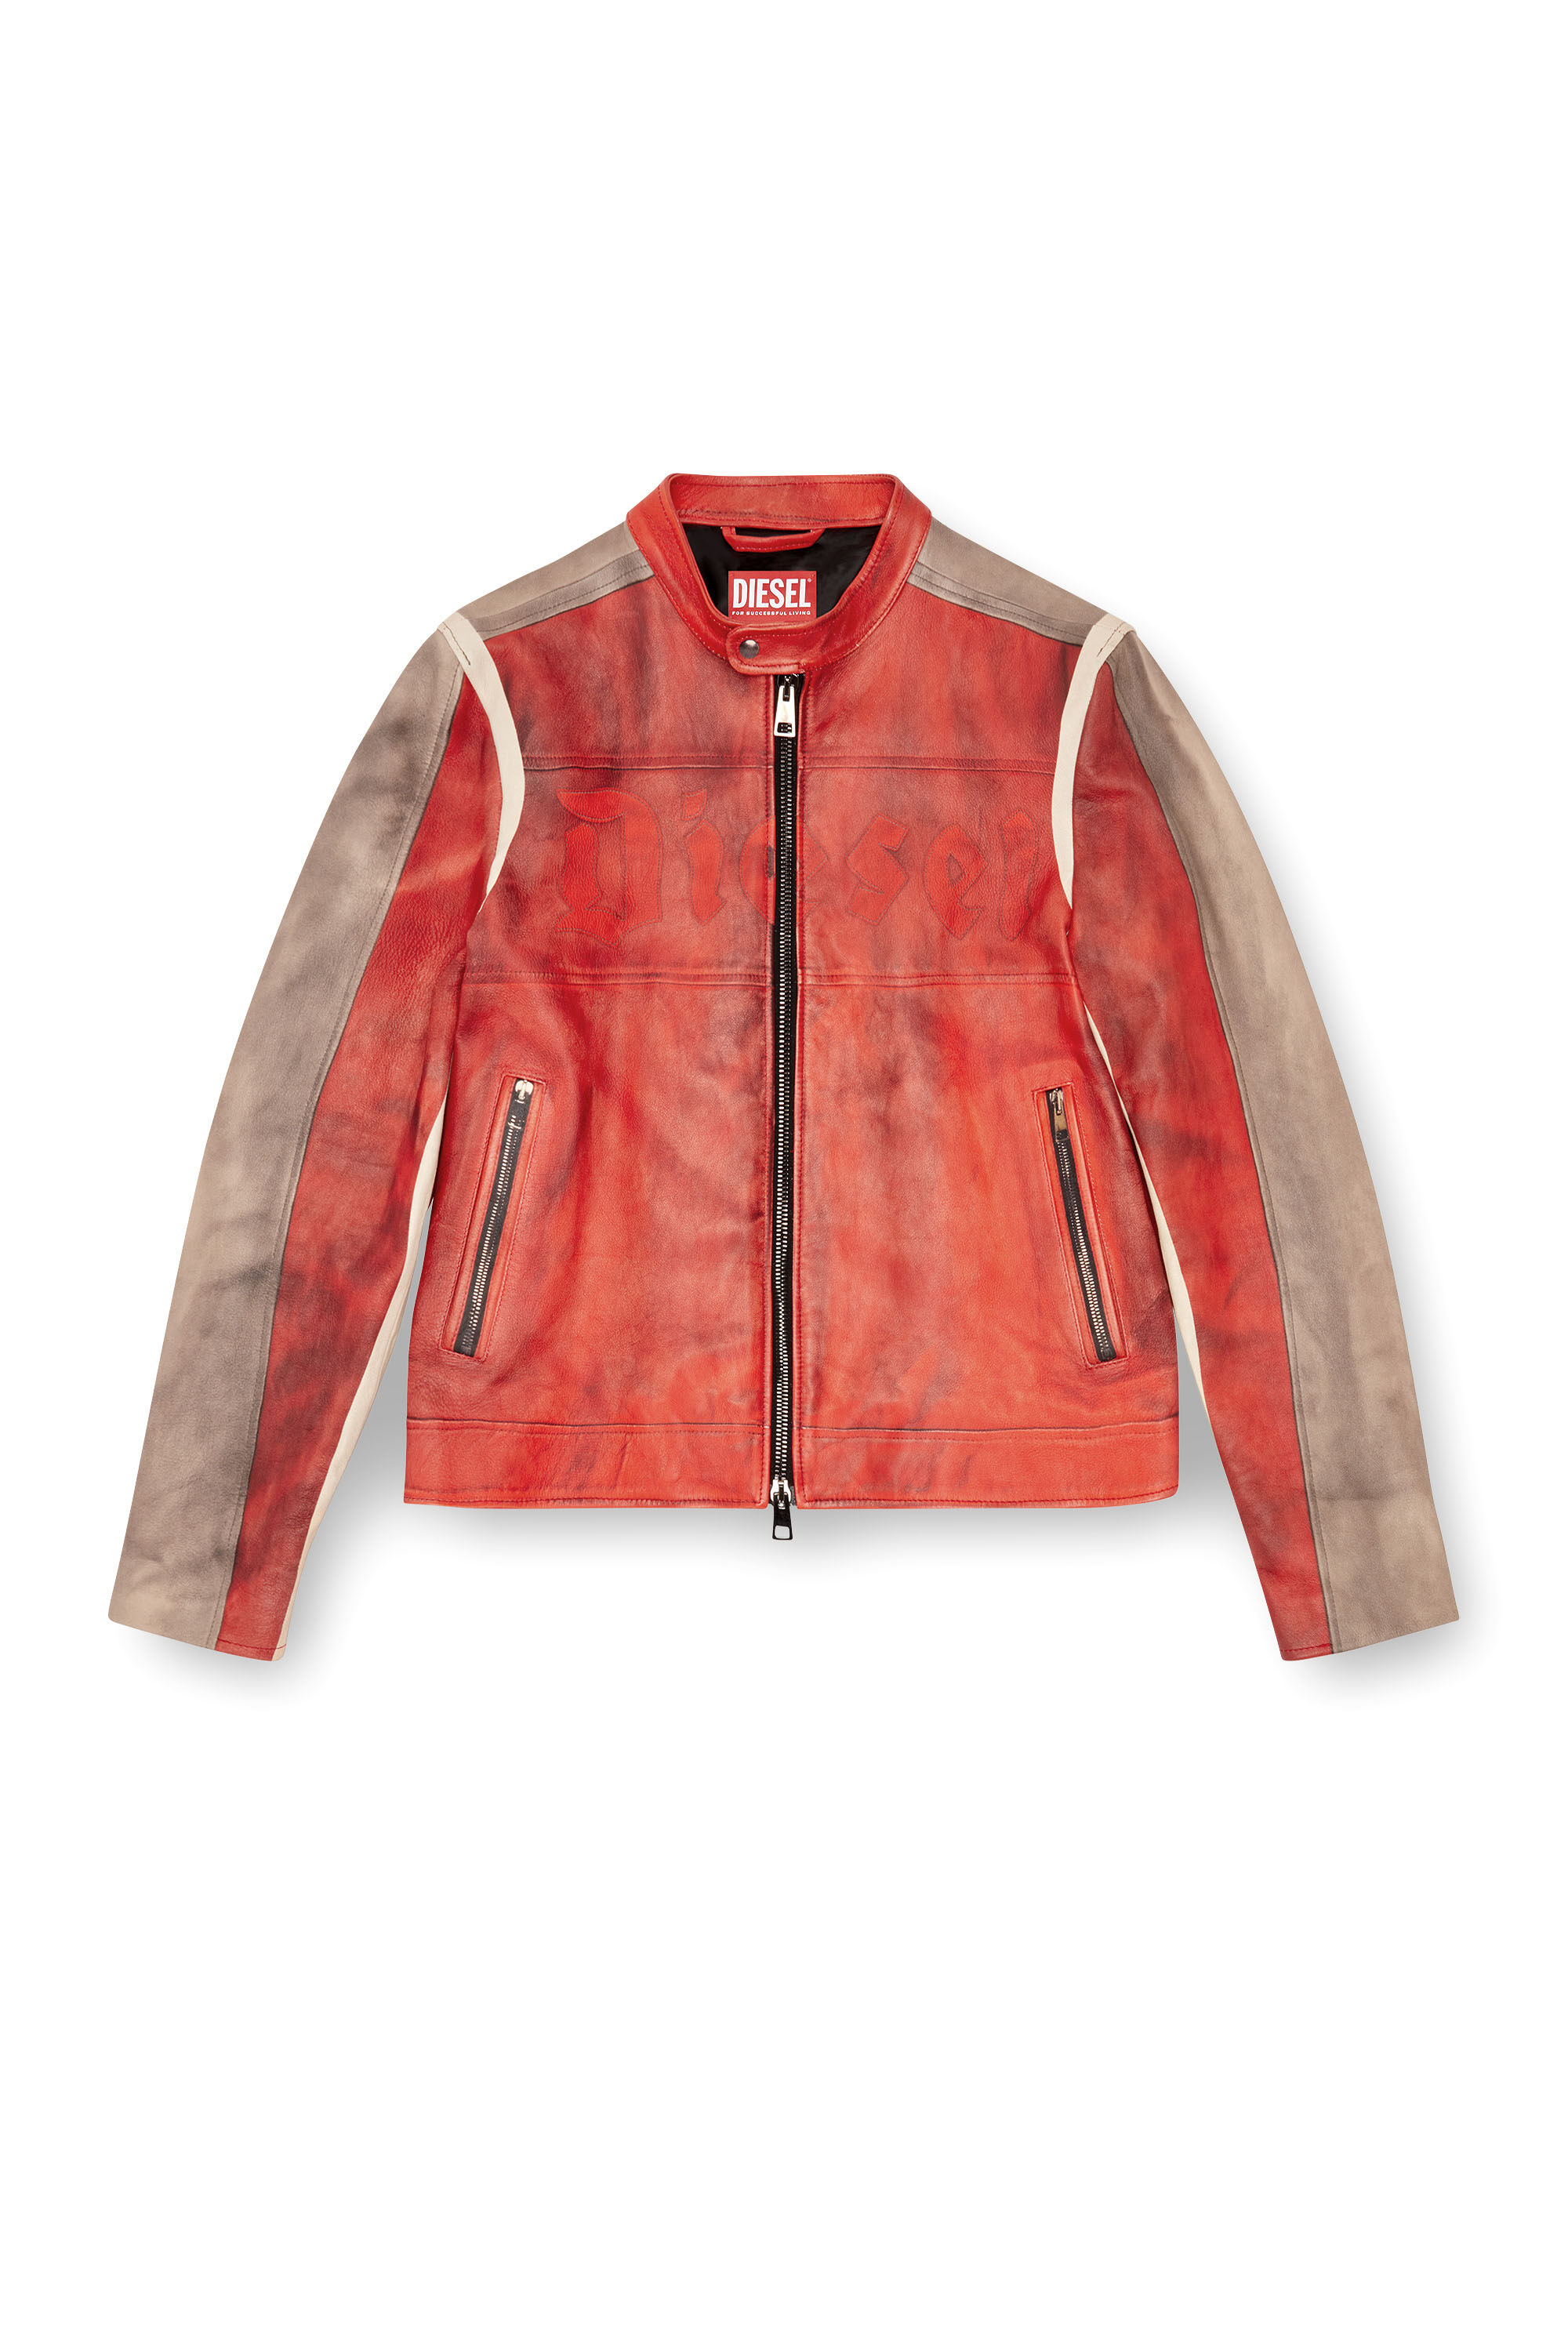 Diesel - L-RUSCHA, Male Dirty-effect leather biker jacket in レッド - Image 2